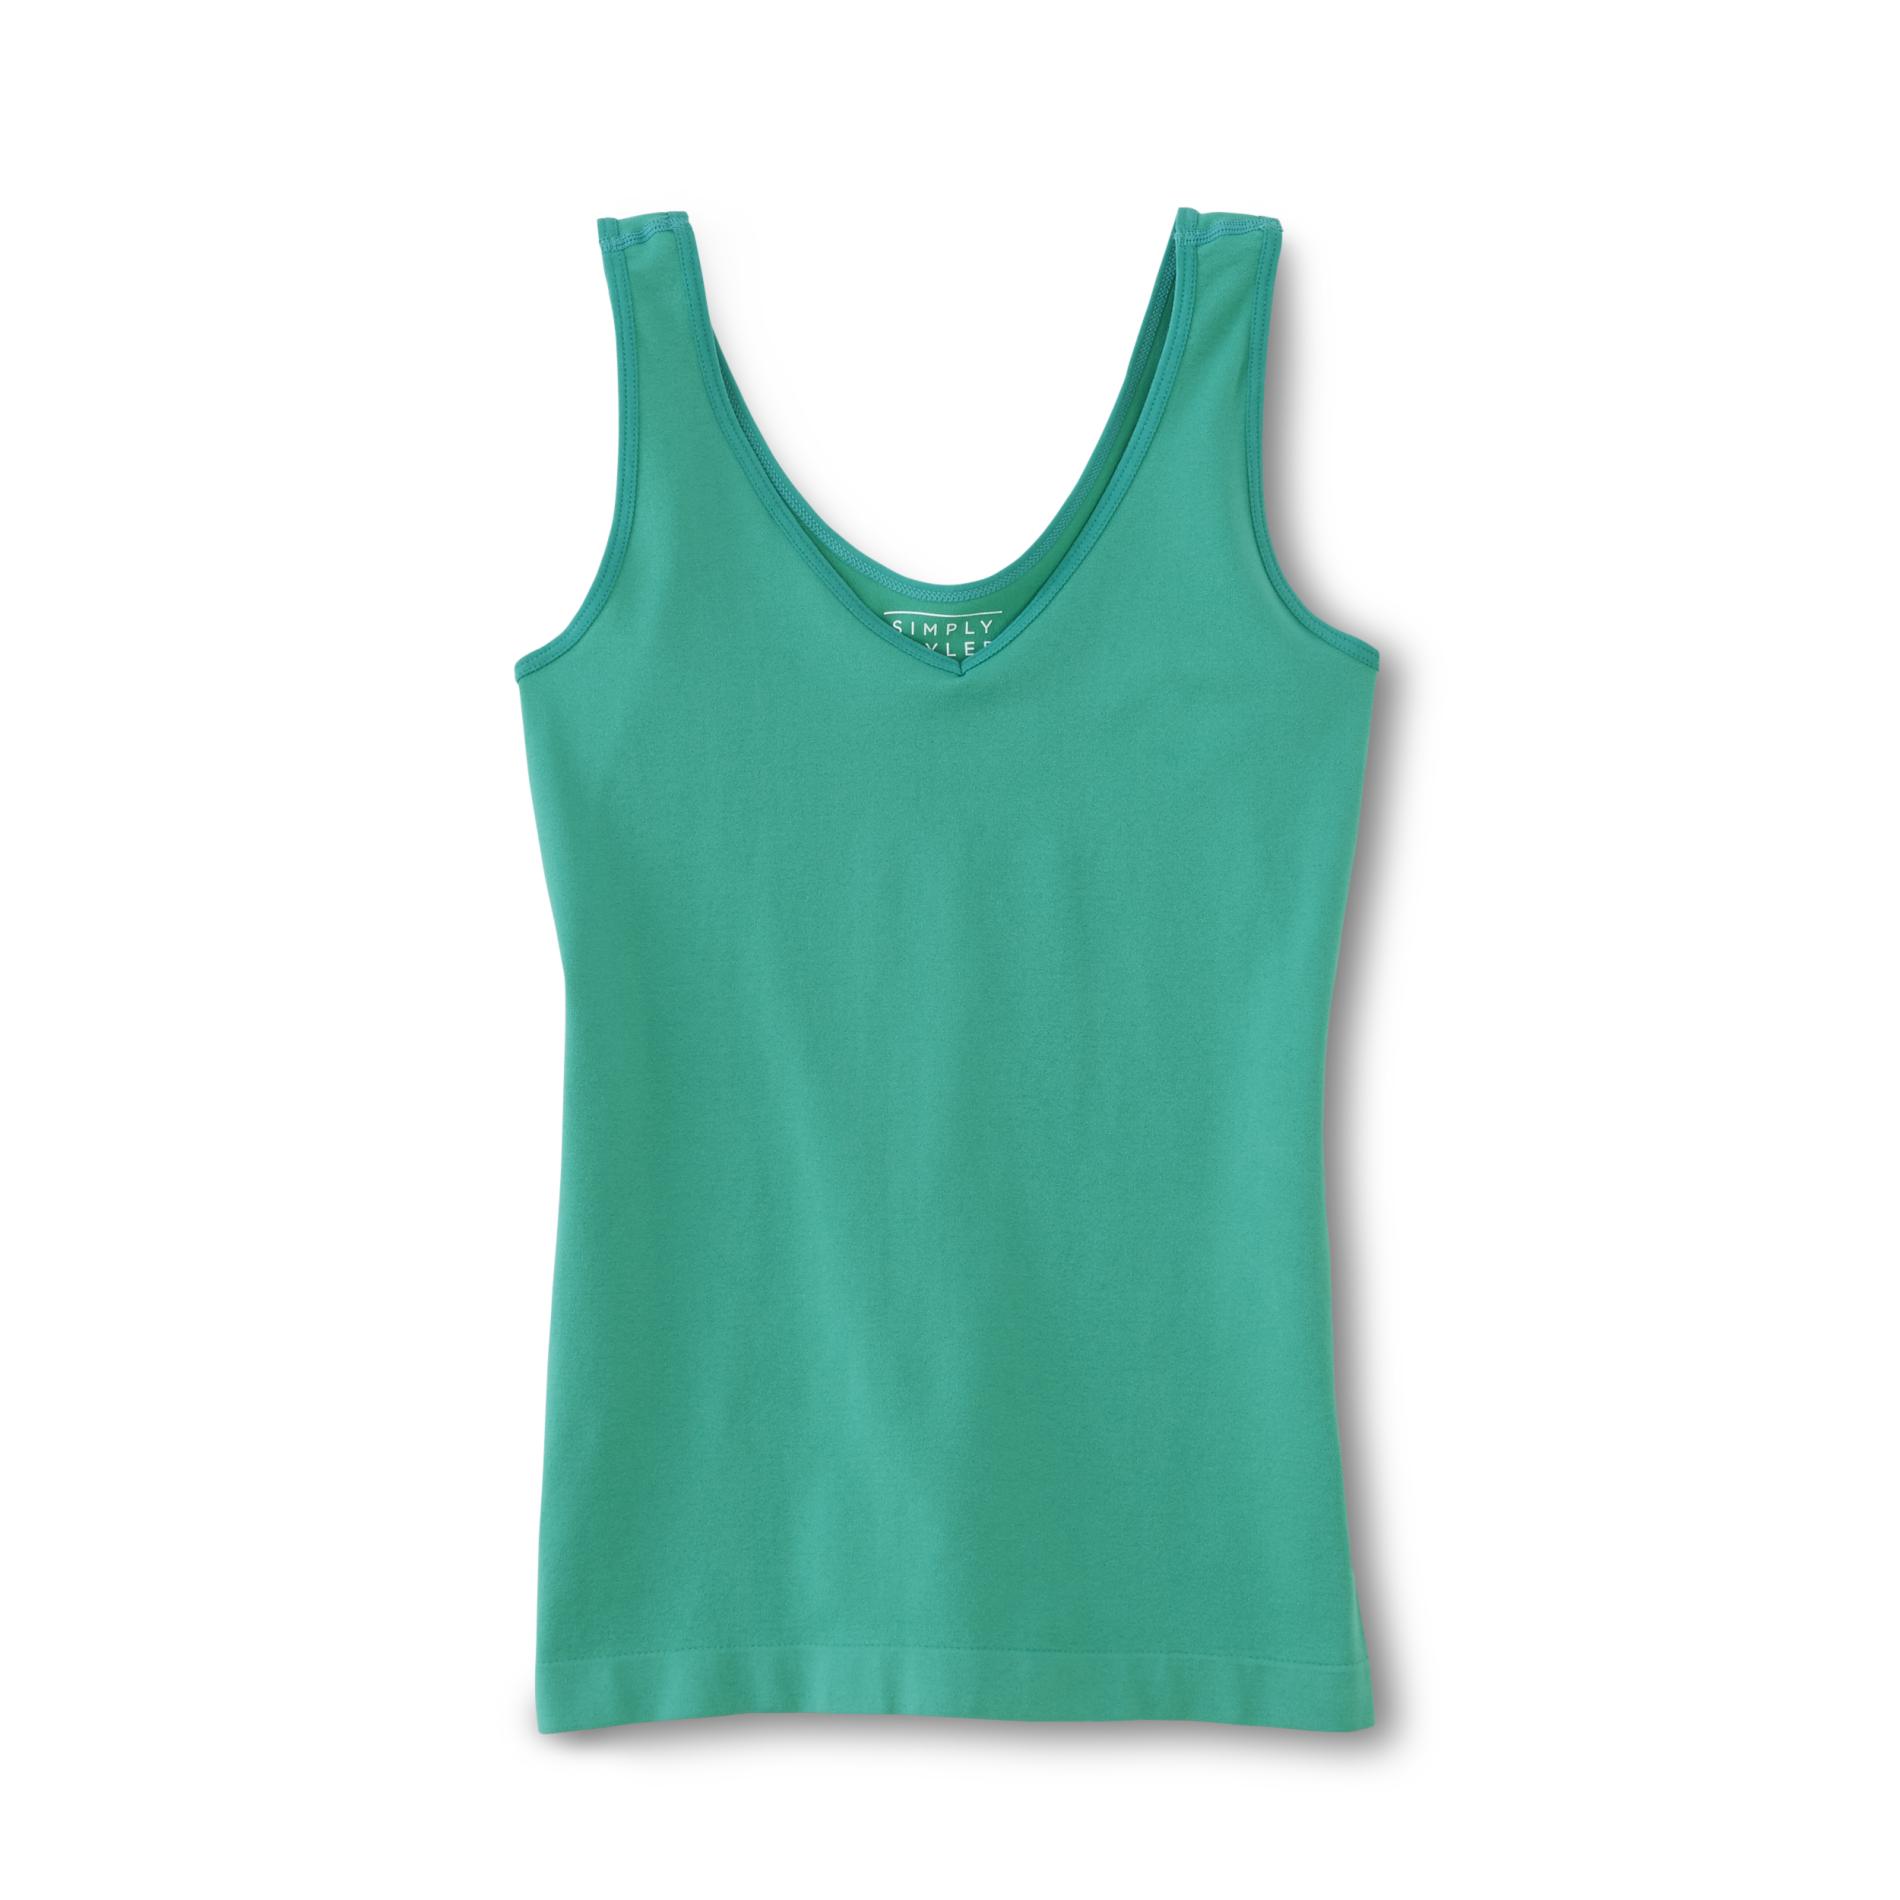 Simply Styled Women's Reversible Tank Top